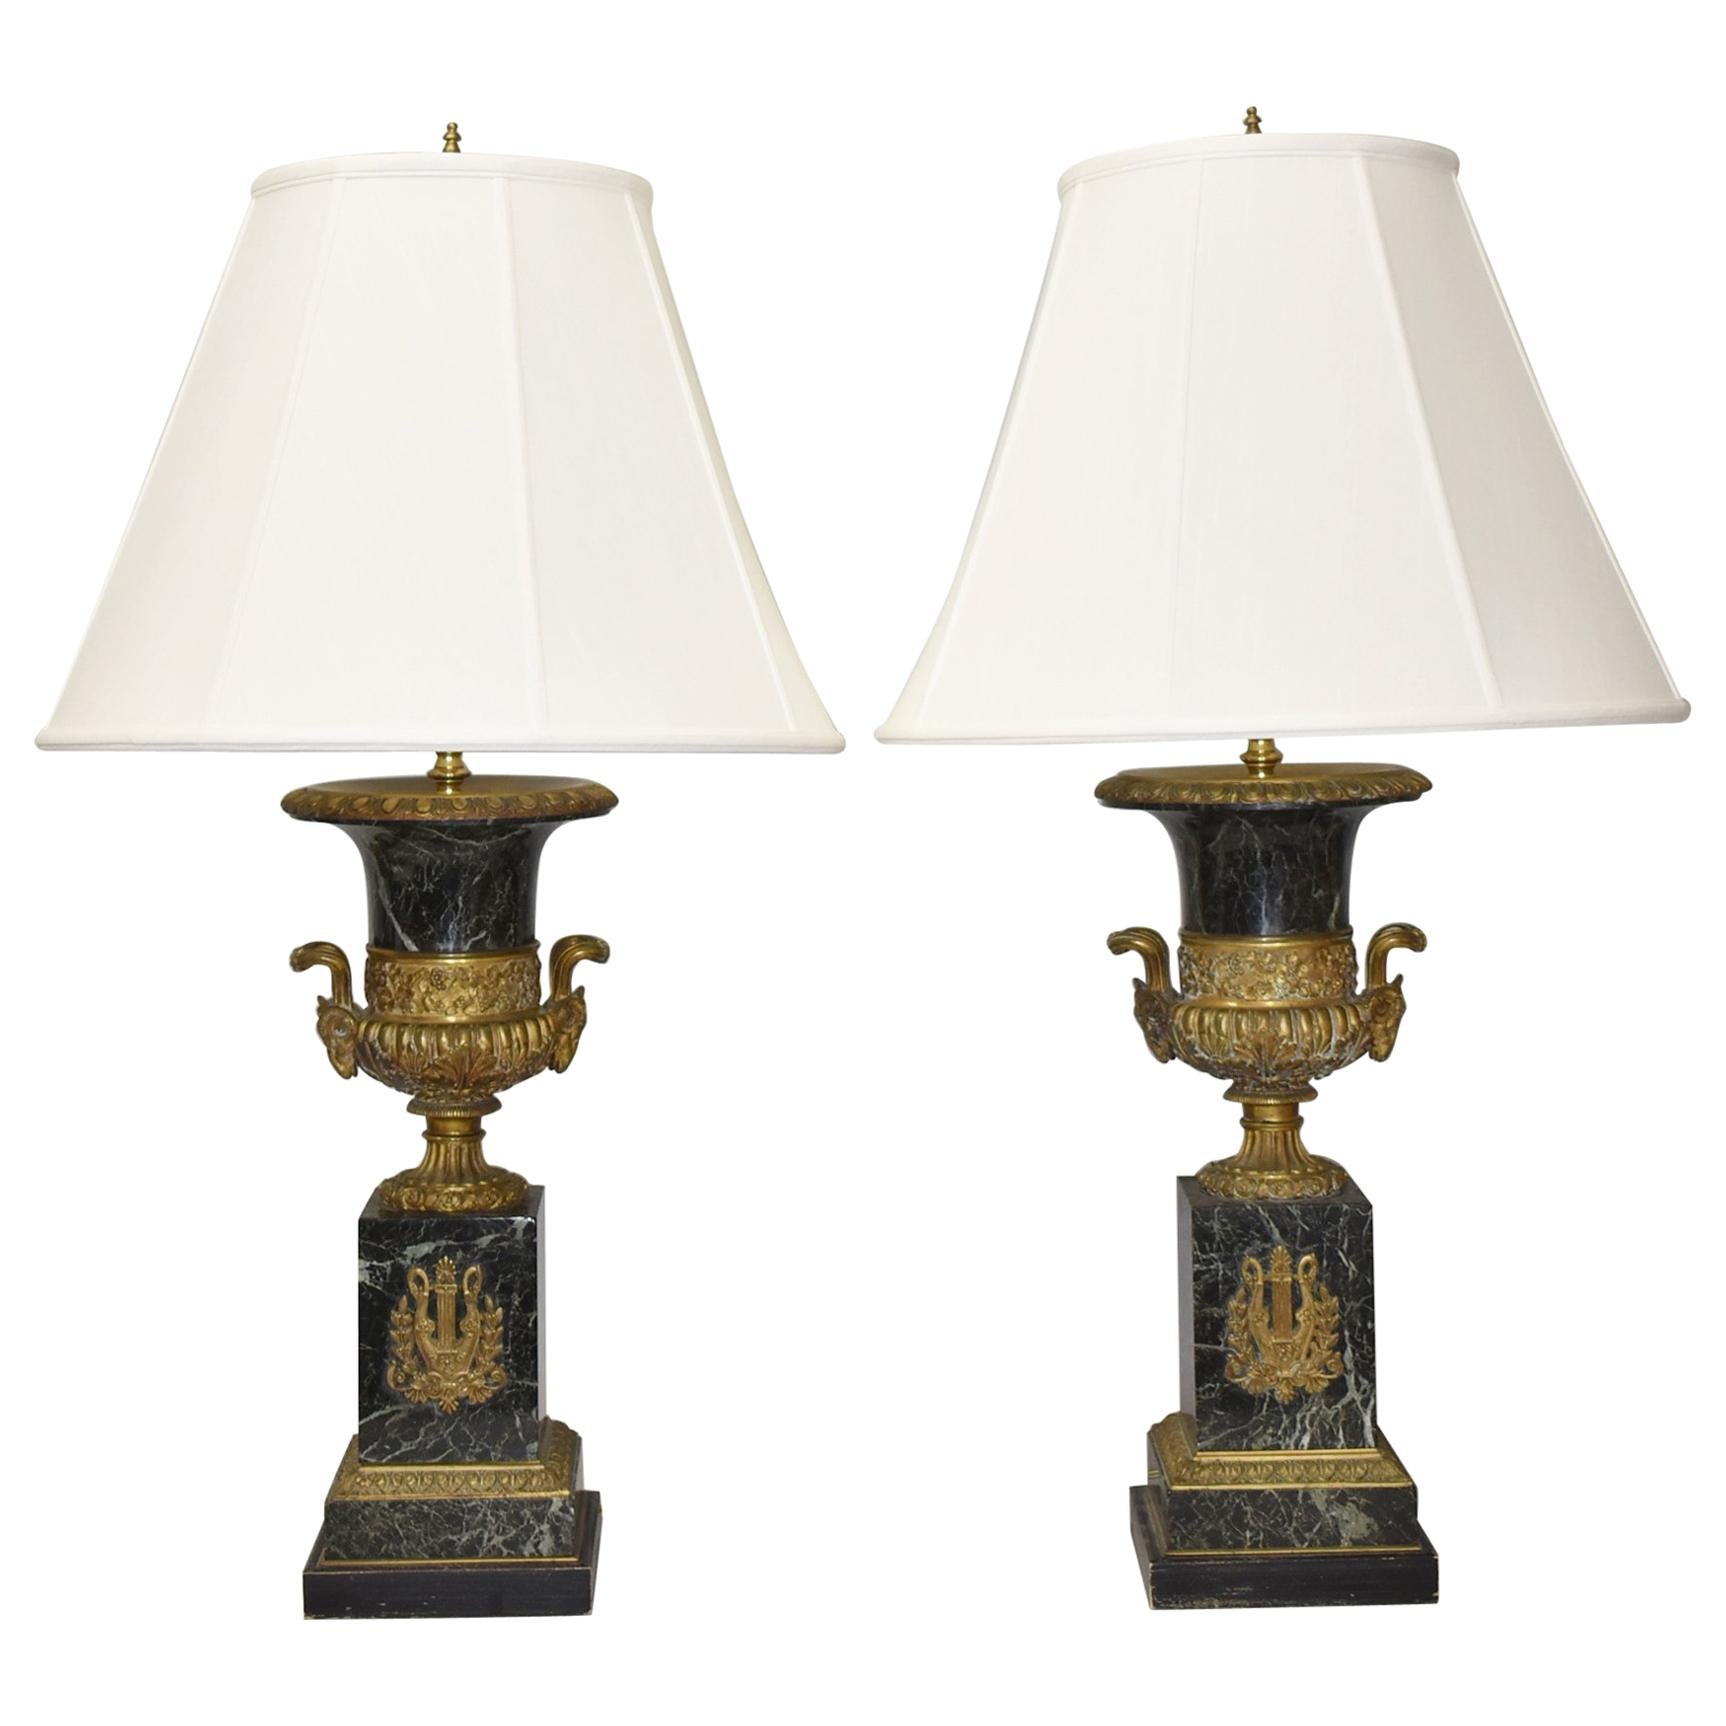 Pair of Marble and Bronze French Empire Style Urn Table Lamps Ram Head